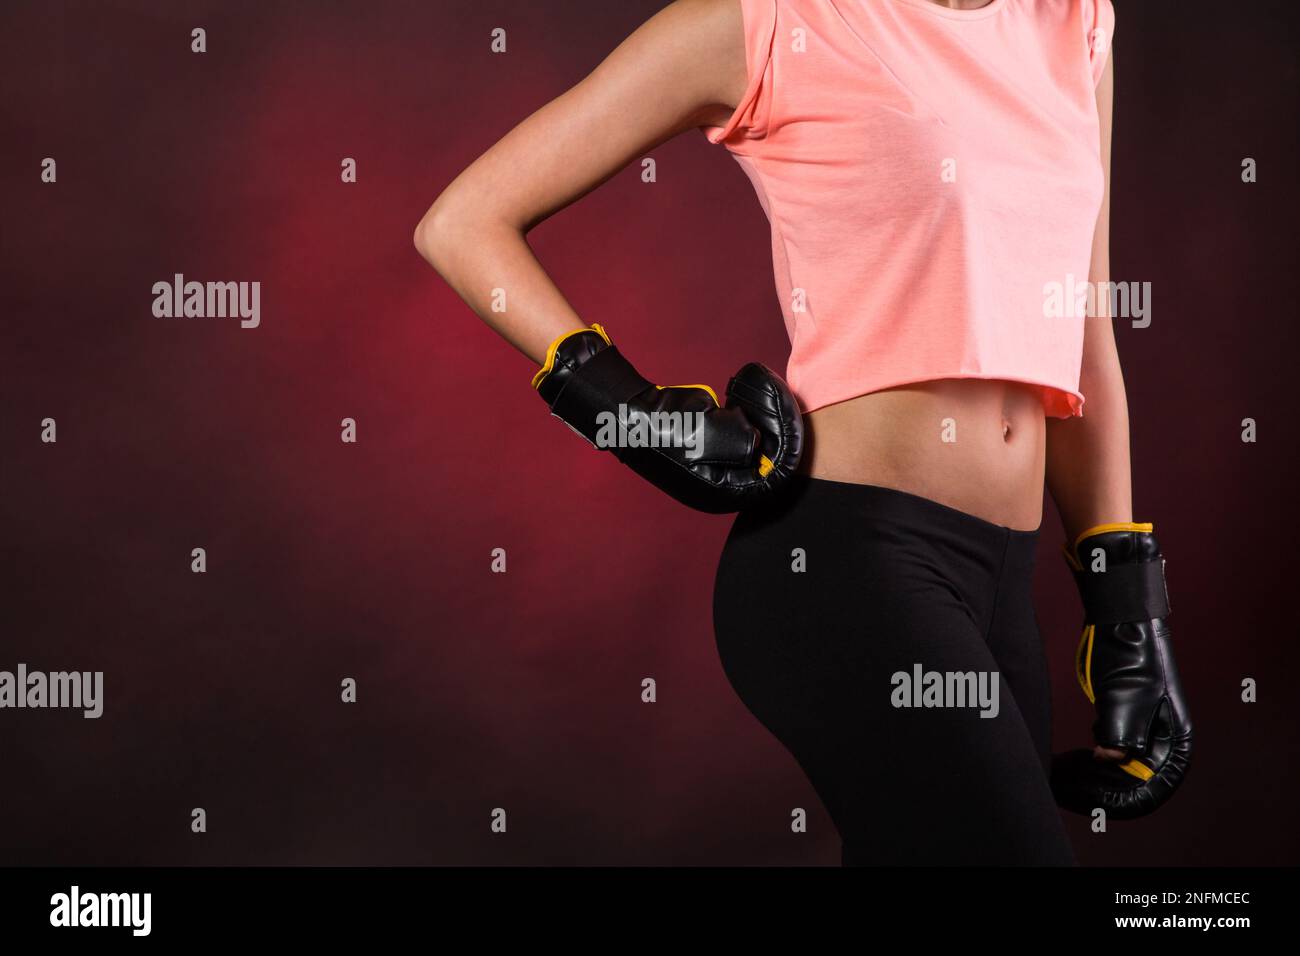 A girl in a pink crop top with boxing gloves on preparing for a training session, isolated on a red background Stock Photo